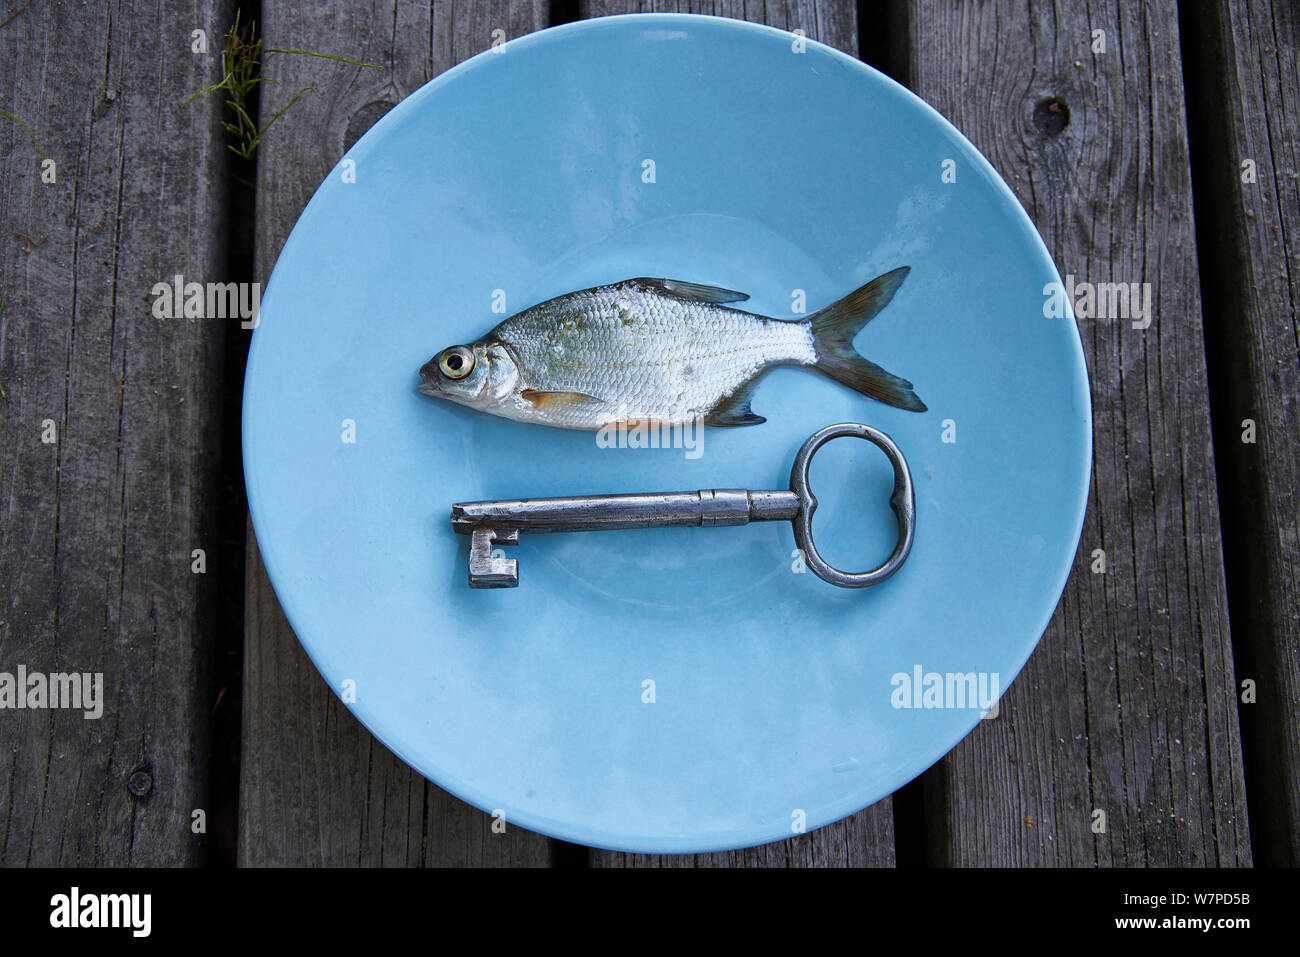 Small silver fish on a blue plate with antique key and wooden grey background. Eating more cyprinid and barb fishes is considered one of the possible Stock Photo